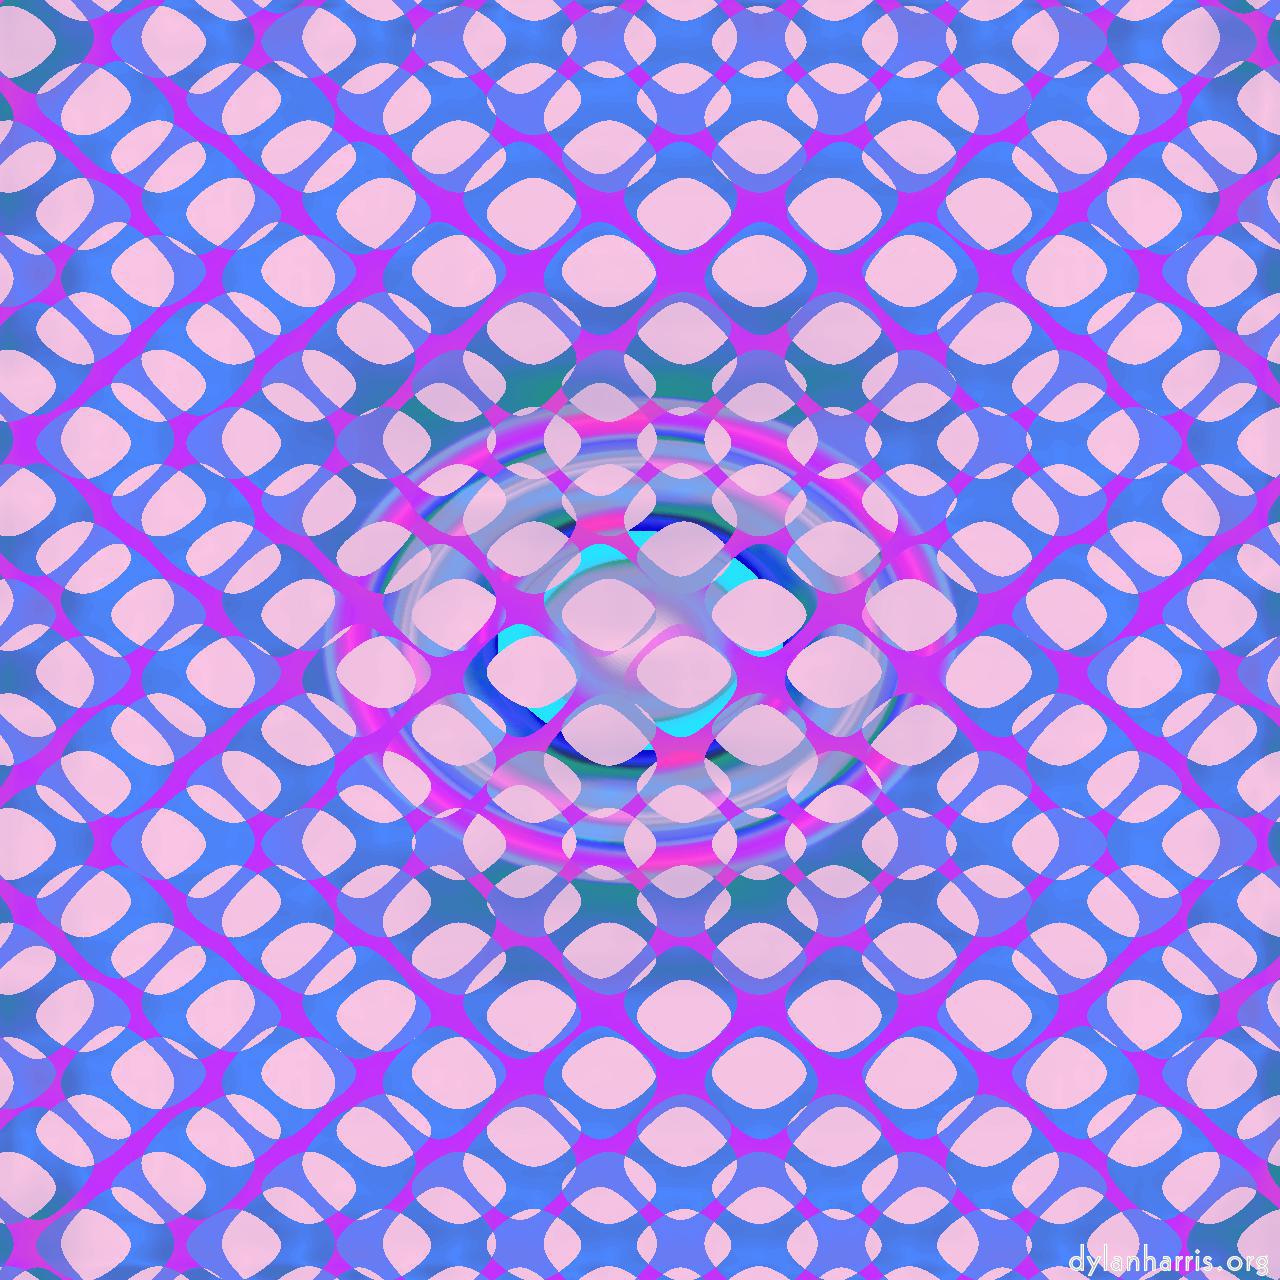 image: op art :: shifted grids